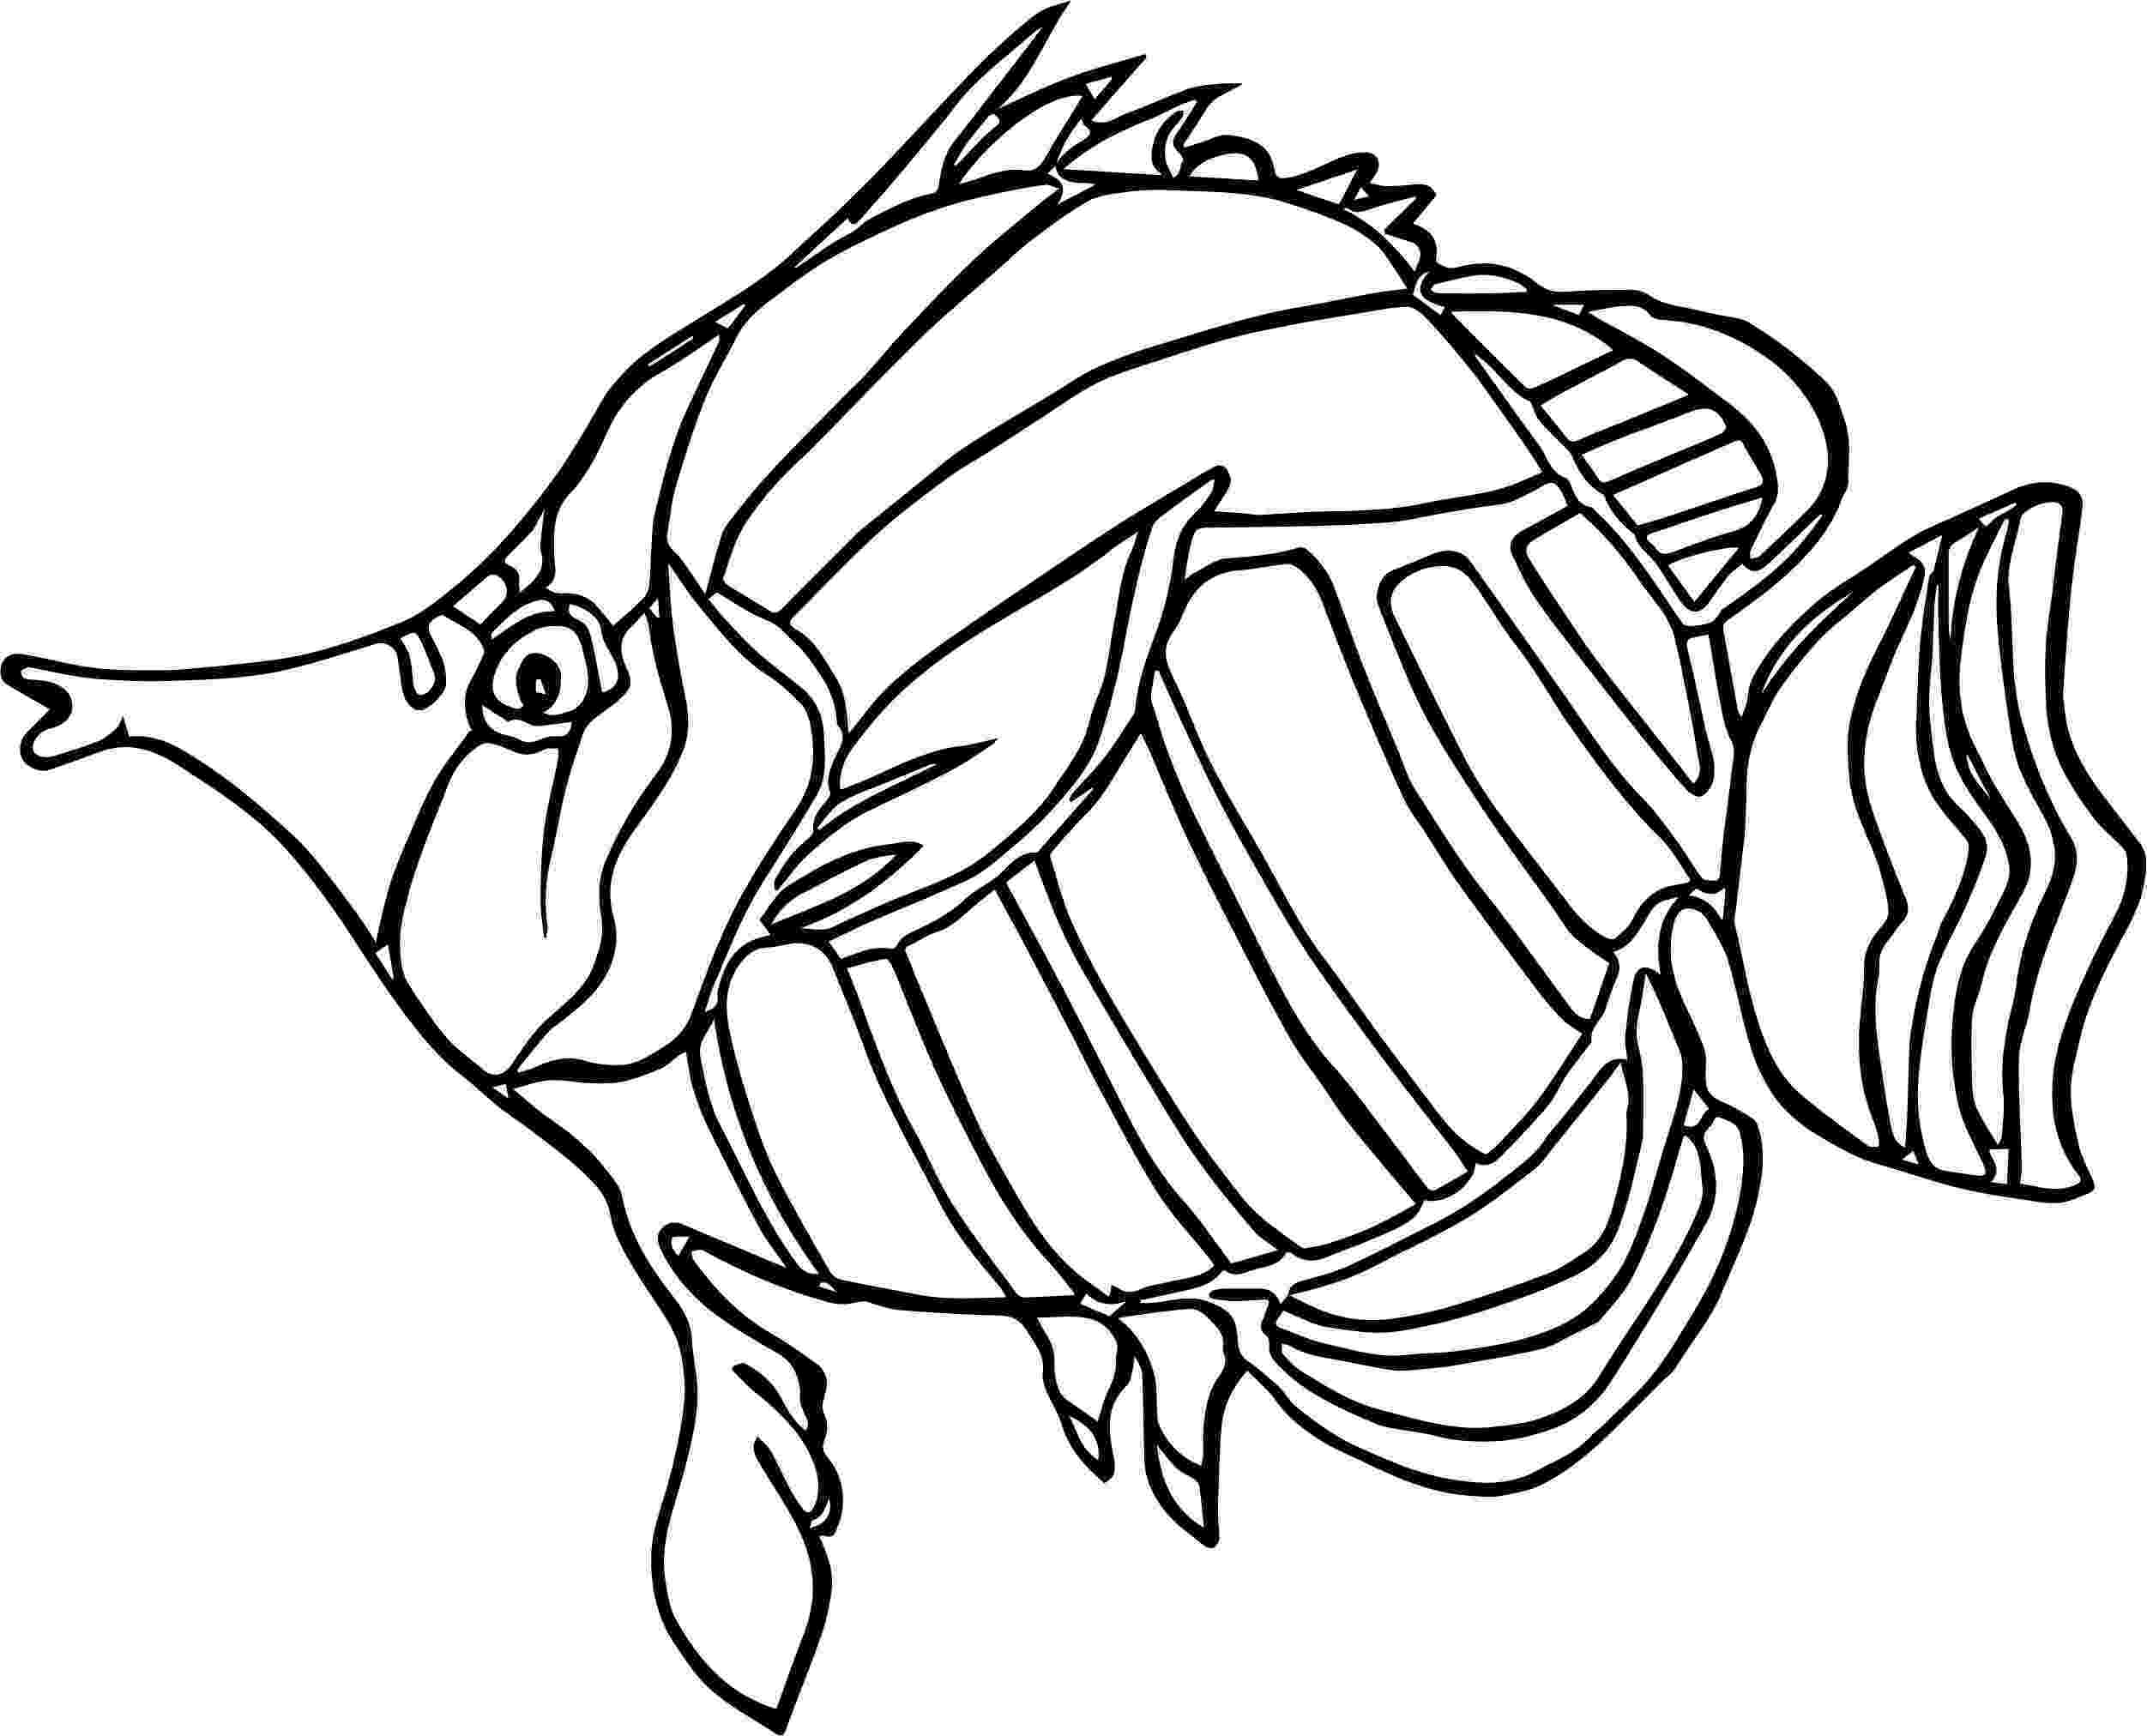 angel fish coloring page angelfish coloring pages download and print angelfish page fish angel coloring 